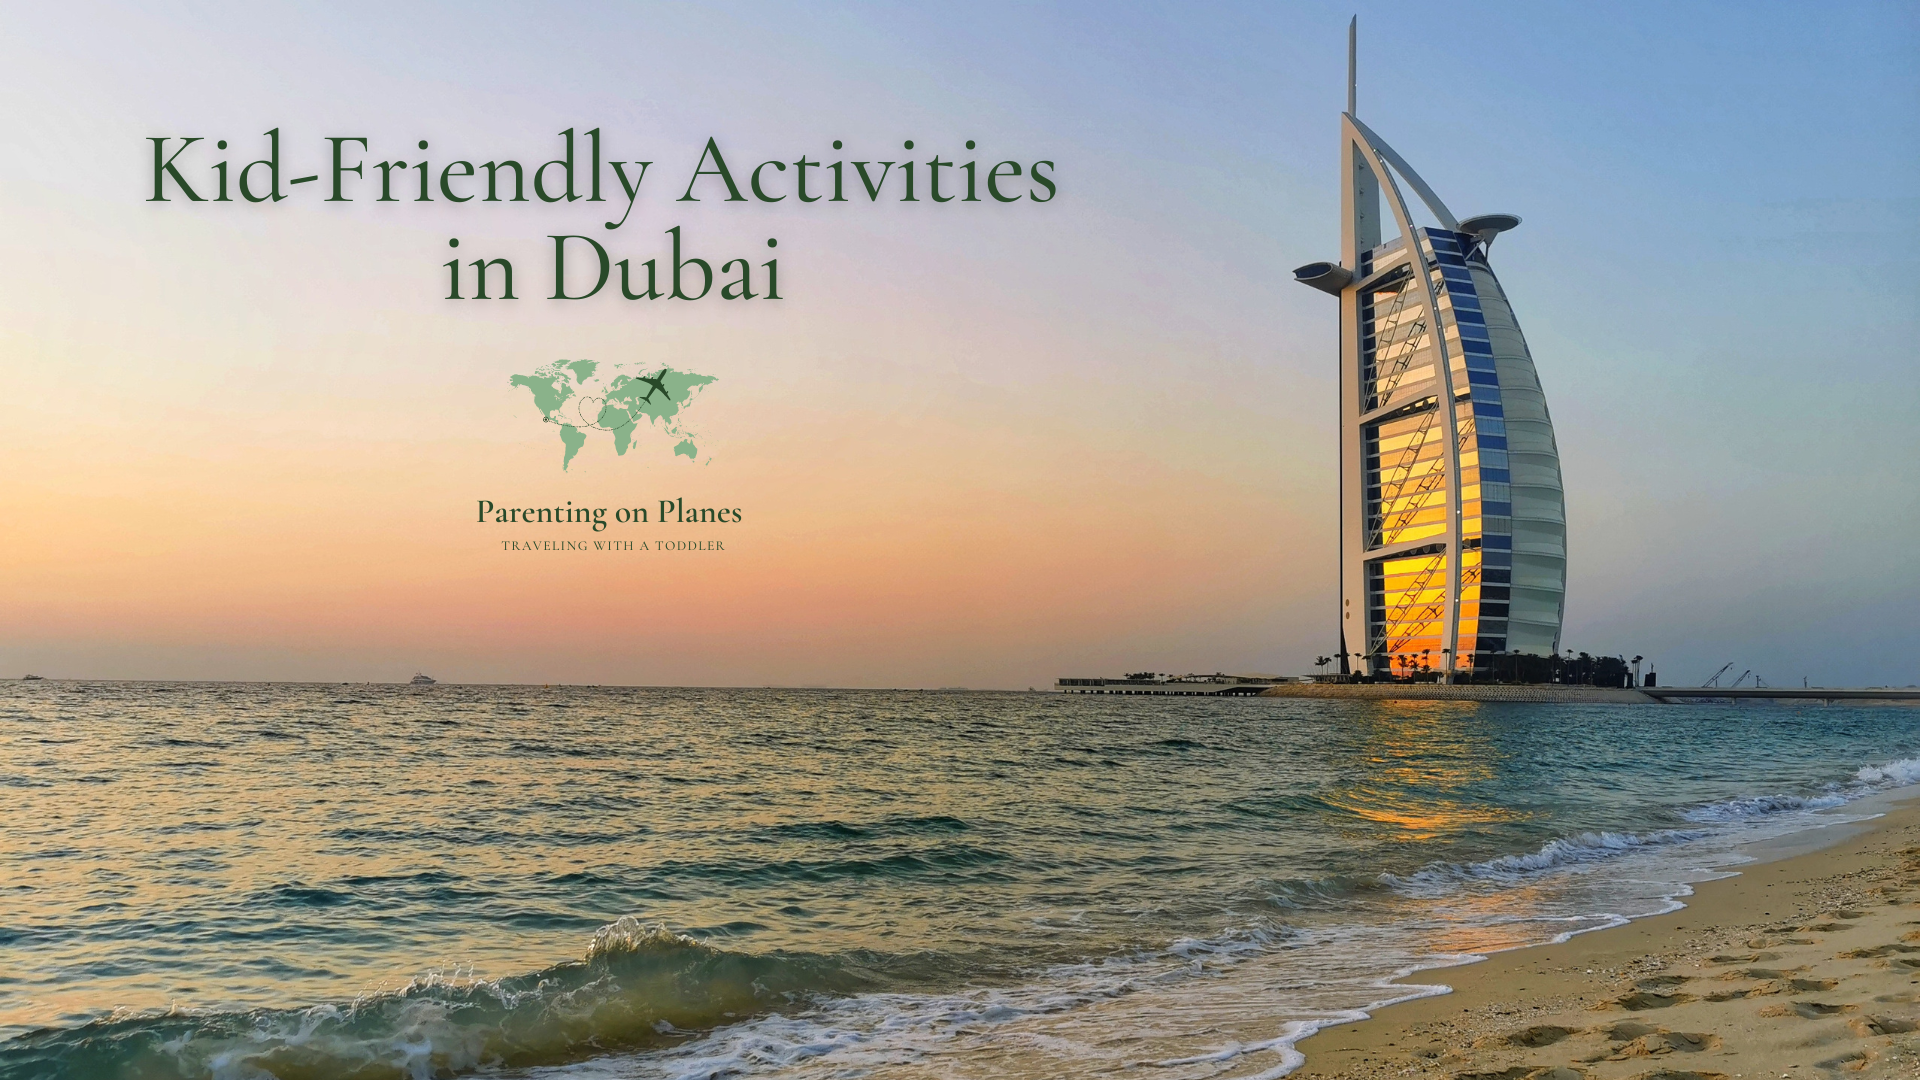 Kid-Friendly Activities in Dubai Cover Photo of the beach